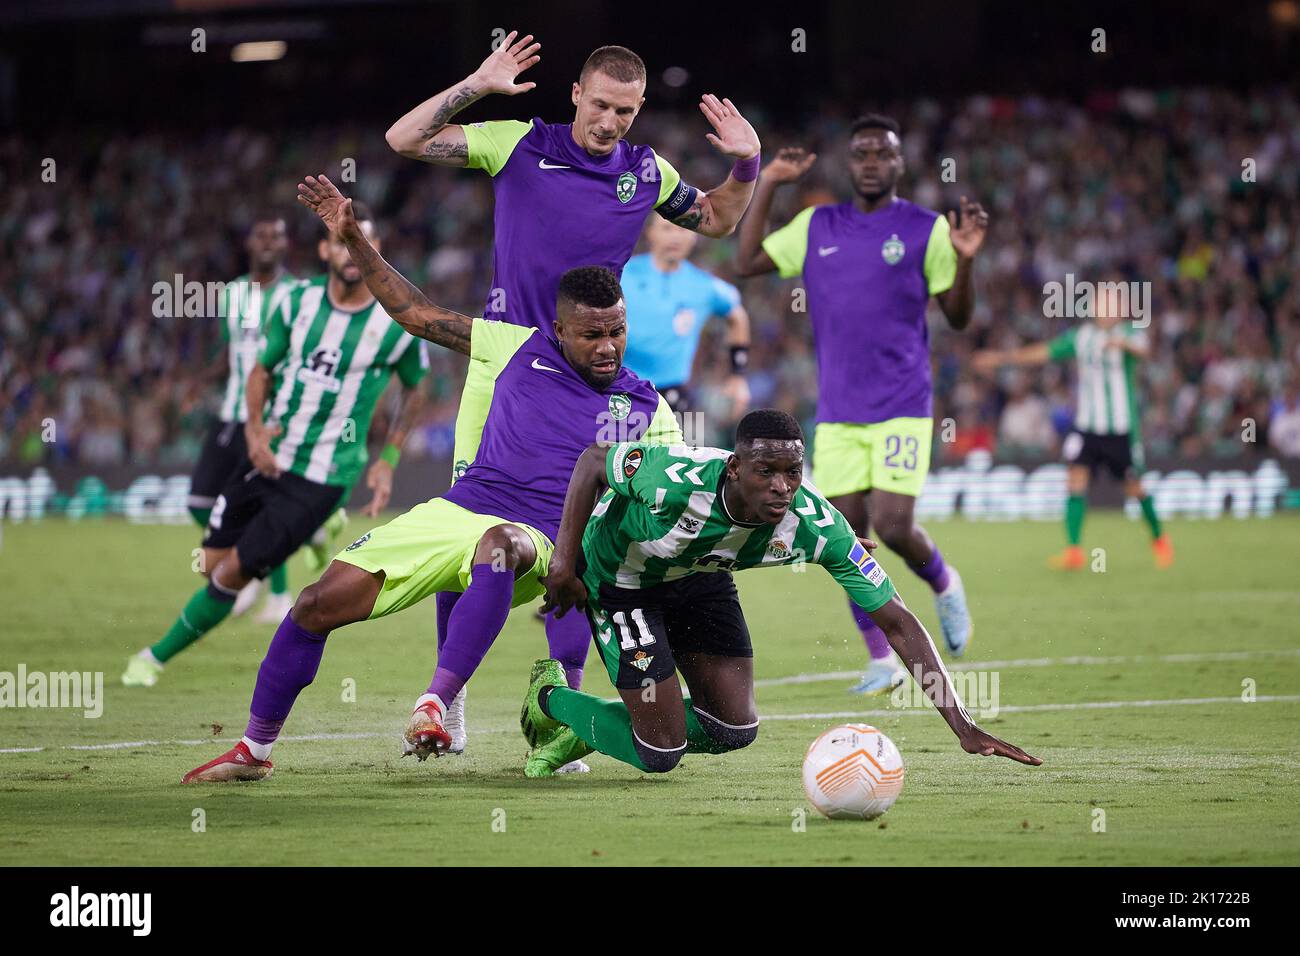 Seville, Spain. 1st Sep, 2022. Luiz Henrique (11) of Real Betis and Cicinho (4) of Ludogorets seen during the UEFA Europa League match between Real Betis and Ludogorets at Estadio Benito Villamarin in Seville. (Photo Credit: Gonzales Photo/Alamy Live News Stock Photo